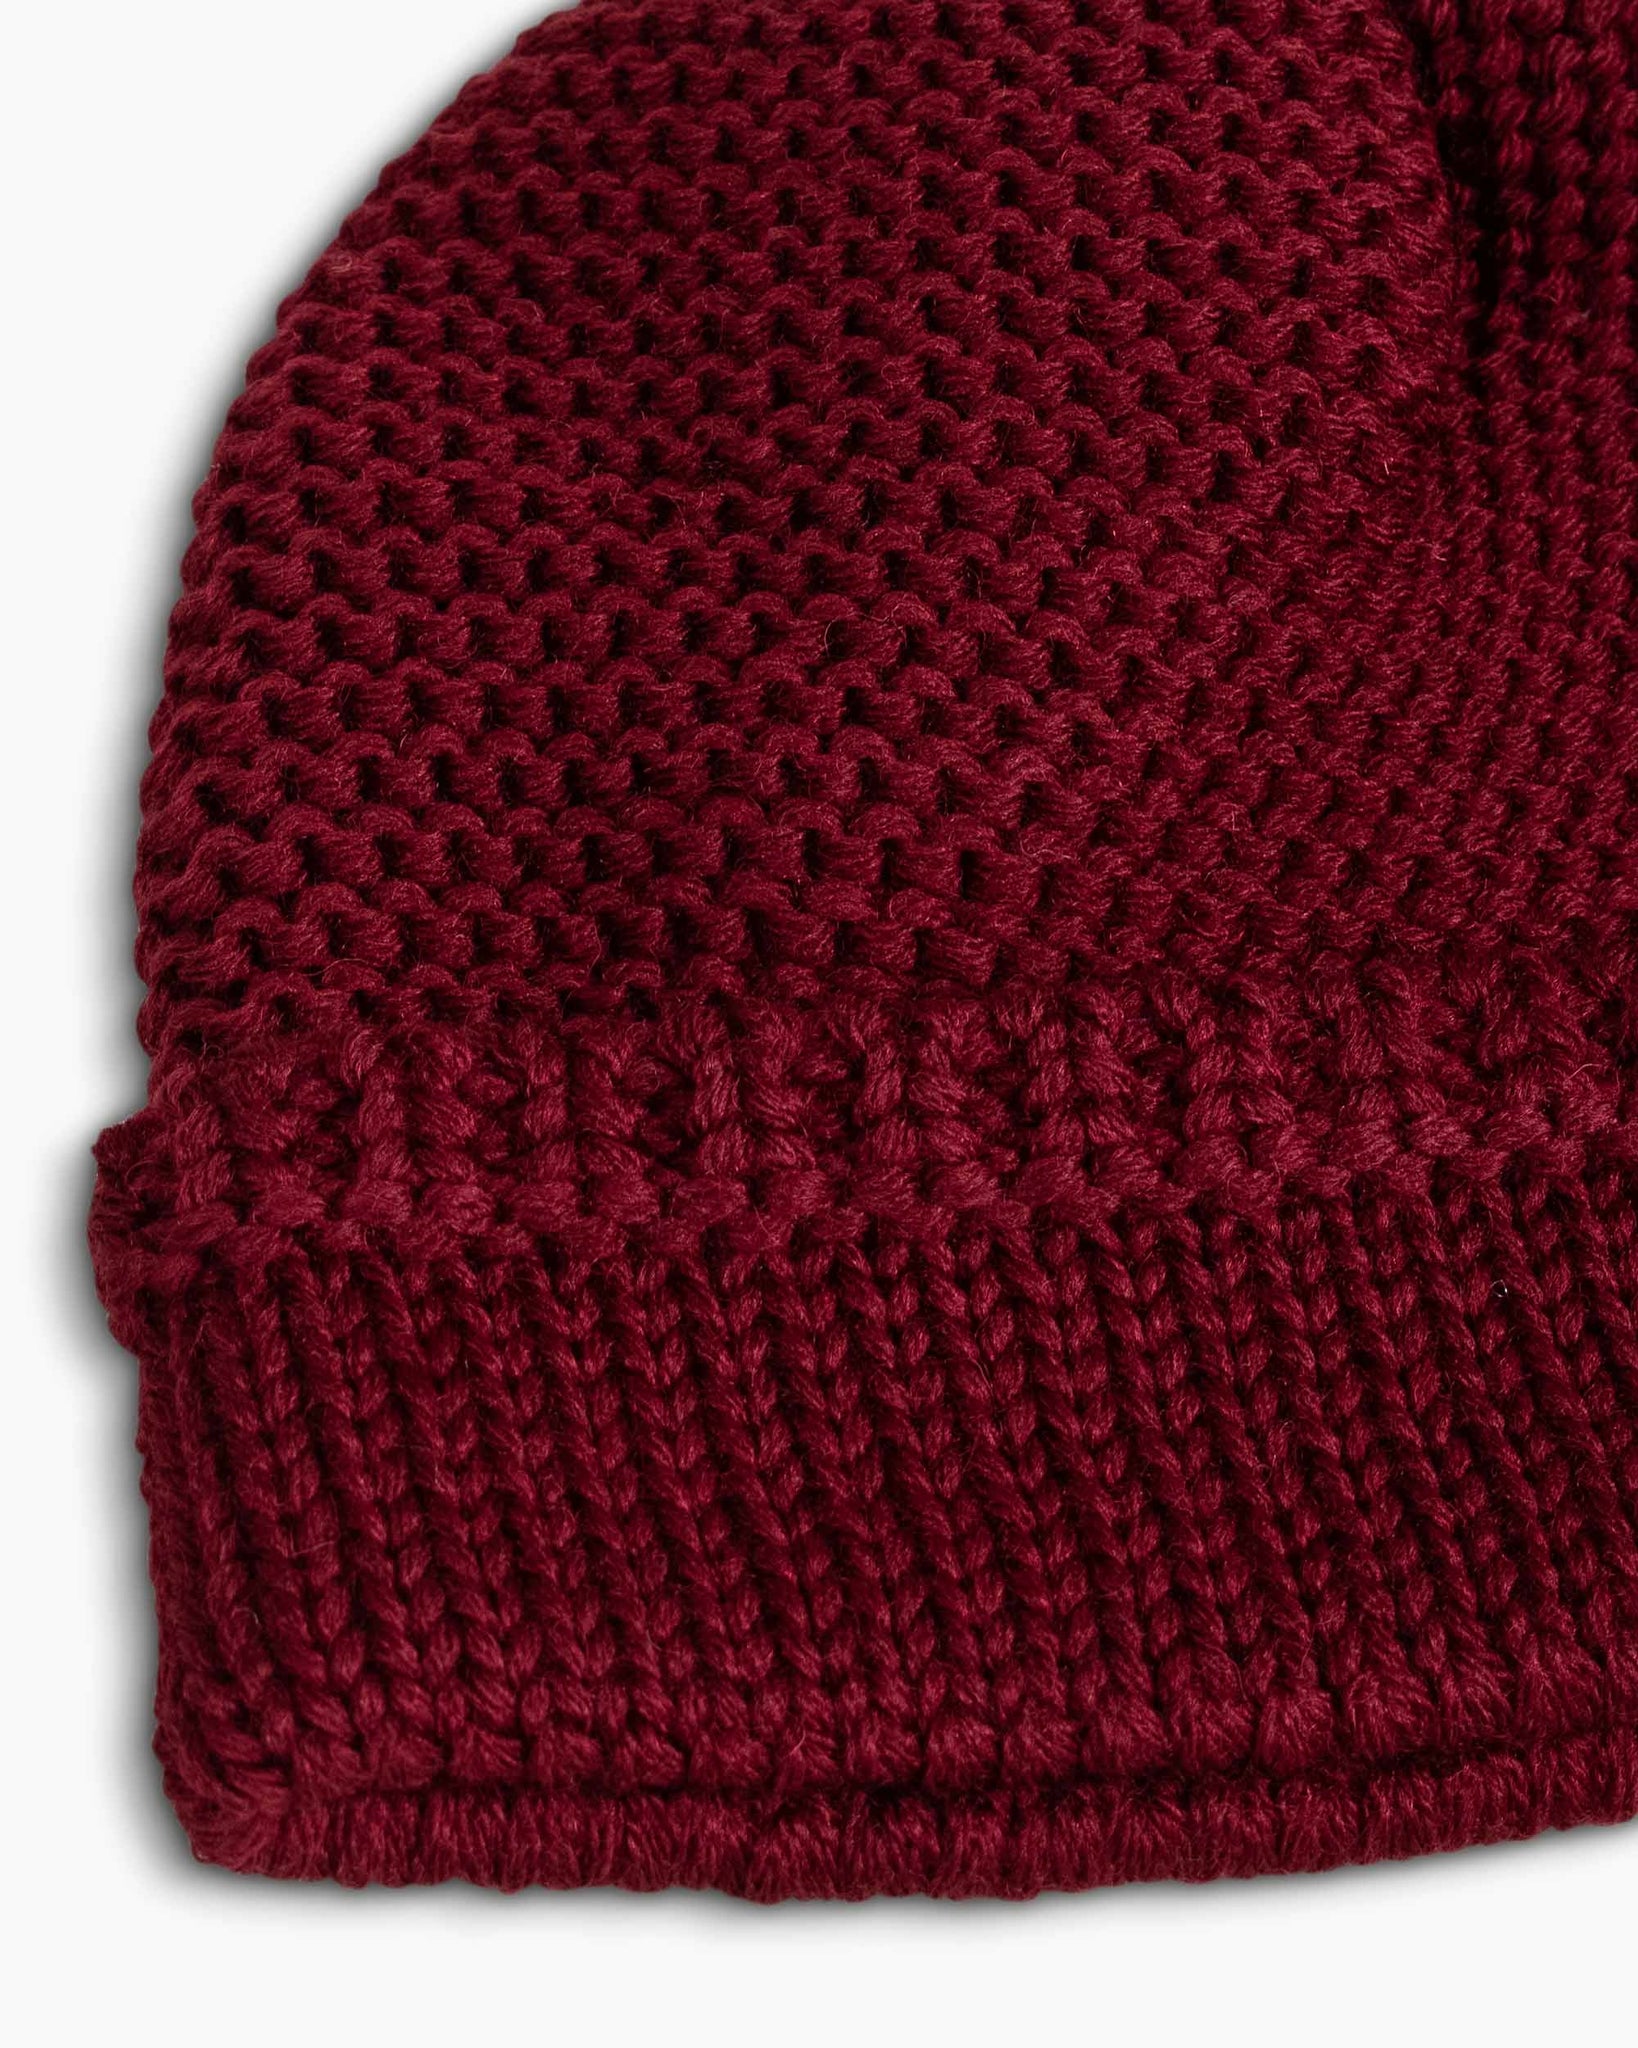 The Real McCoy's MA22109 Fisherman's Knit Cap Maroon Details